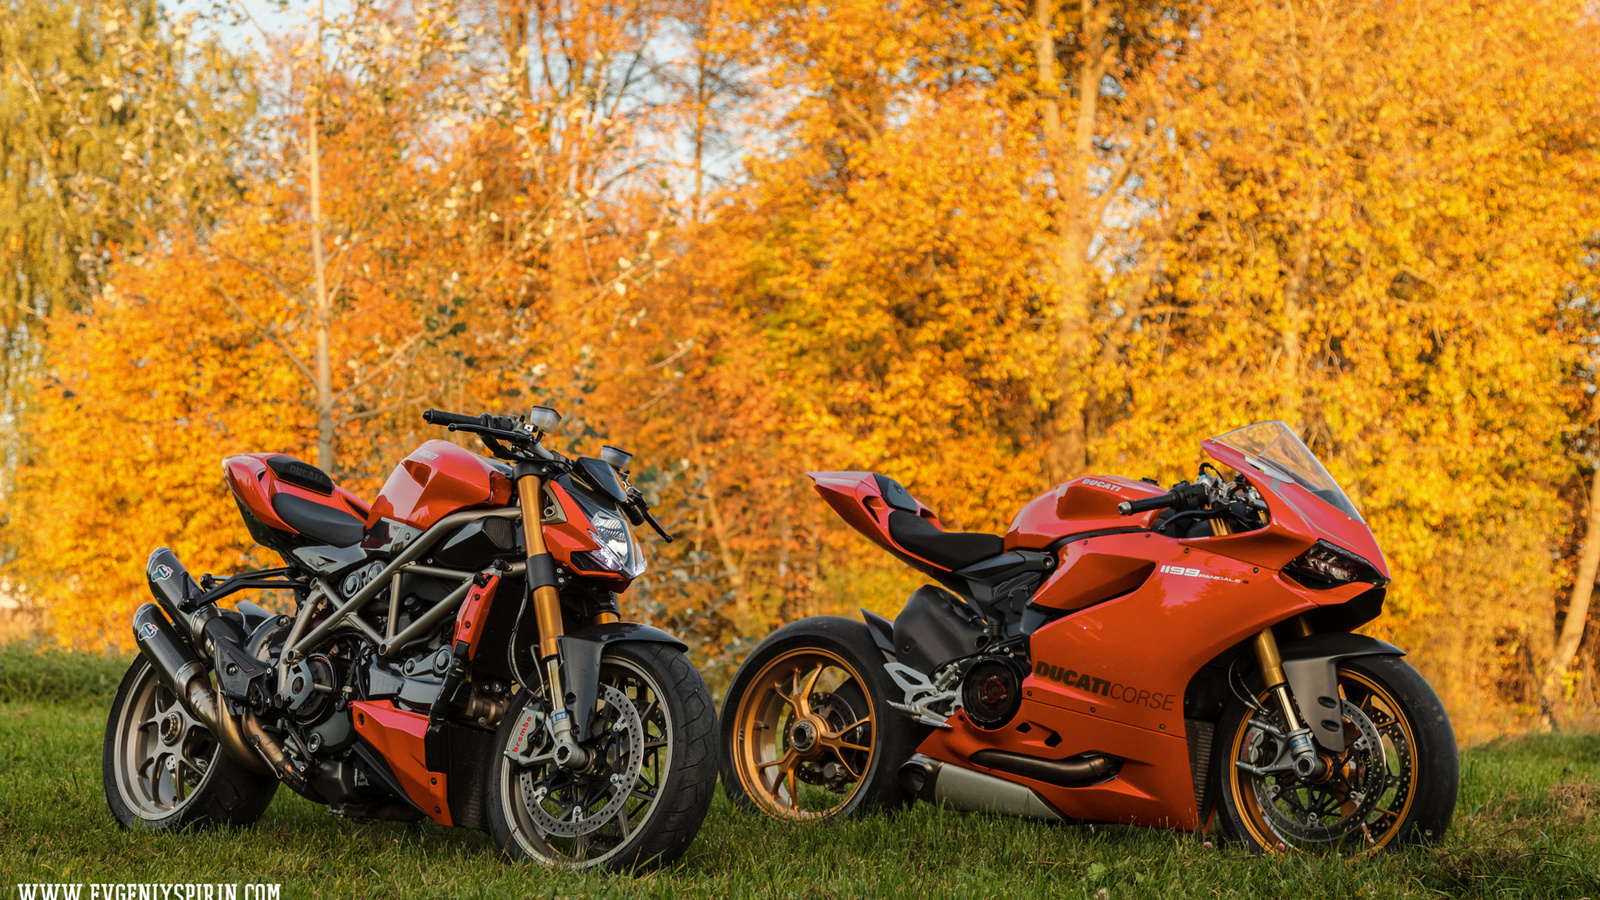 500px, motorcycle, fall, leaves, orange, ducati 1199 panigale, ducati streetfighter s